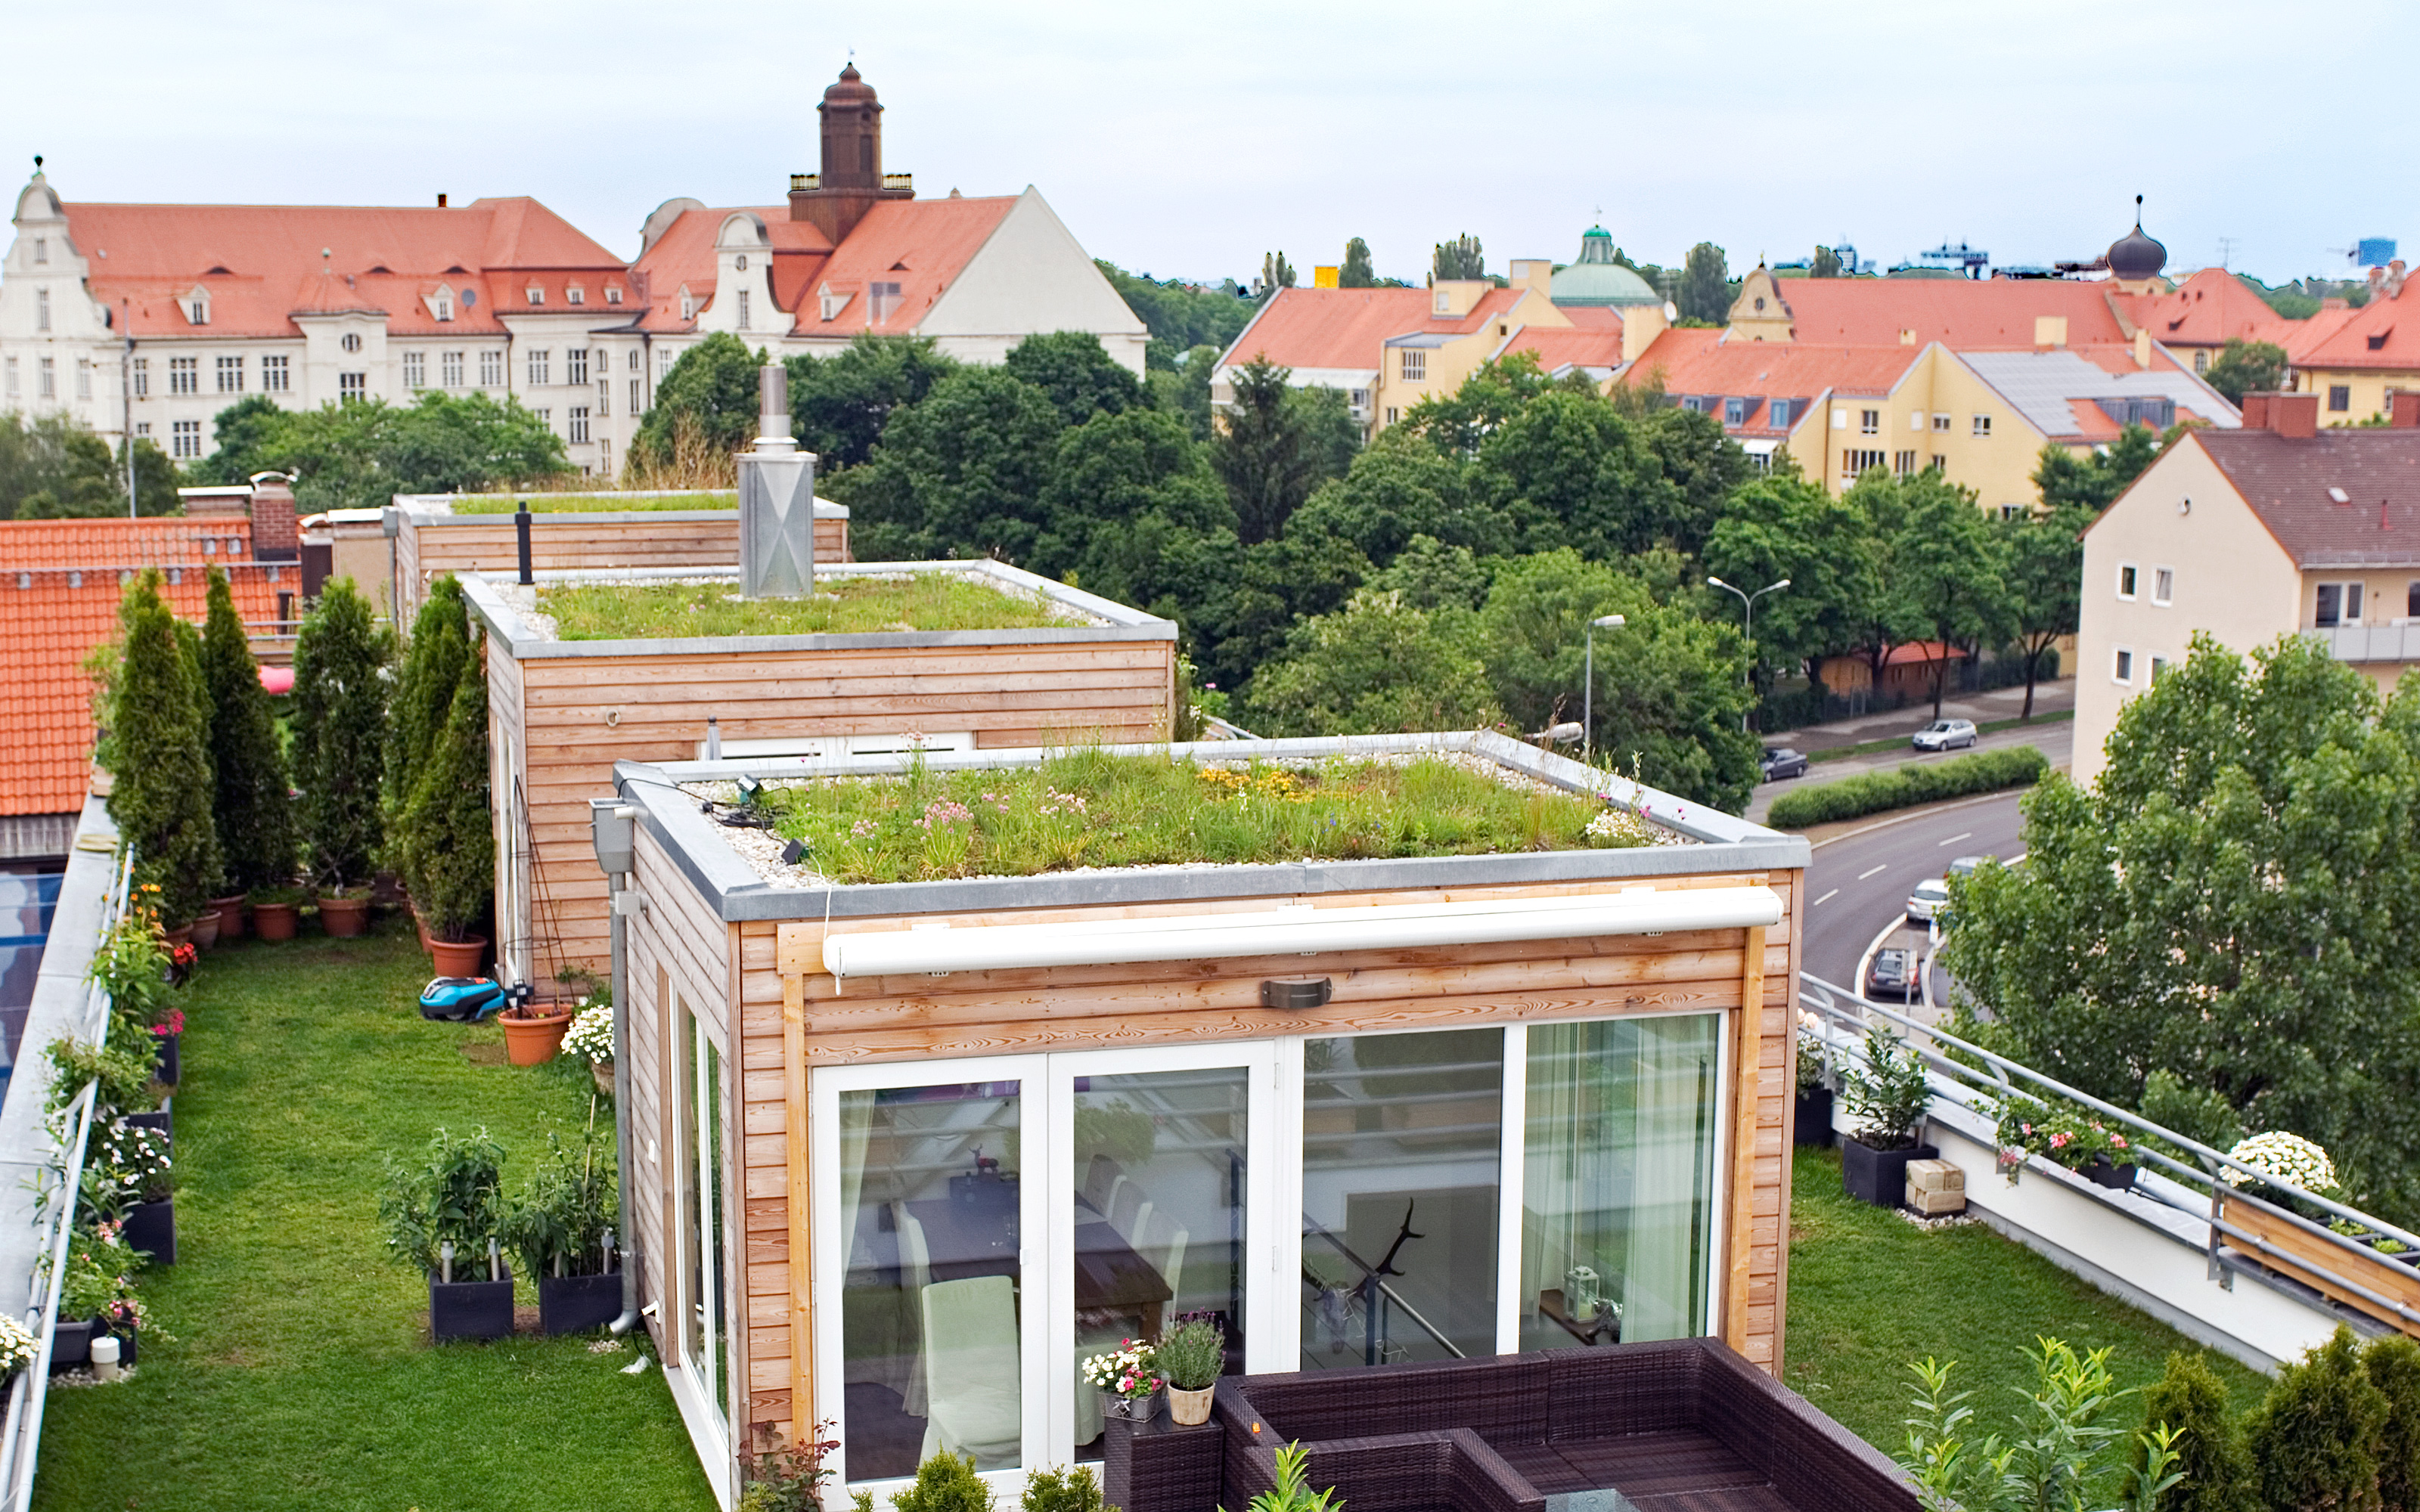 Roof garden with two cubical houses